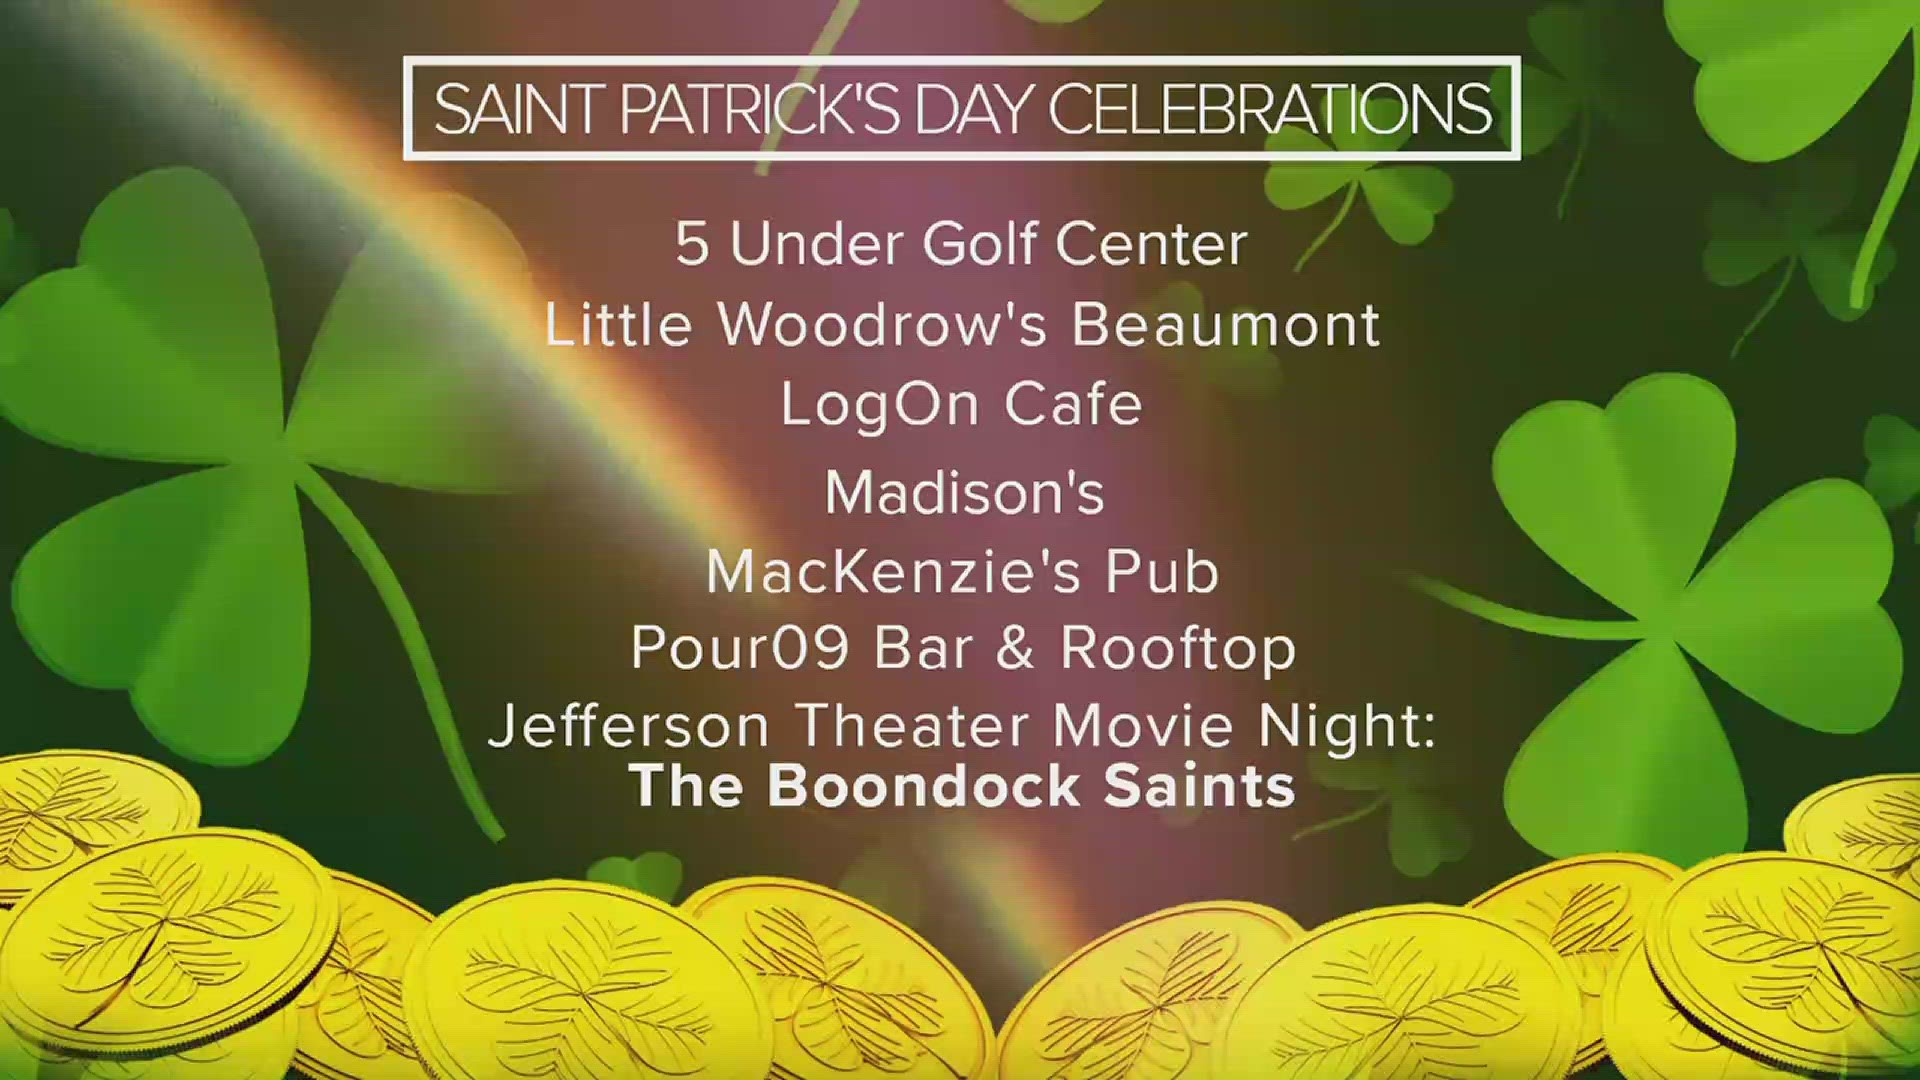 The celebration of Irish heritage known as St. Patrick’s Day falls on March 17 every year.